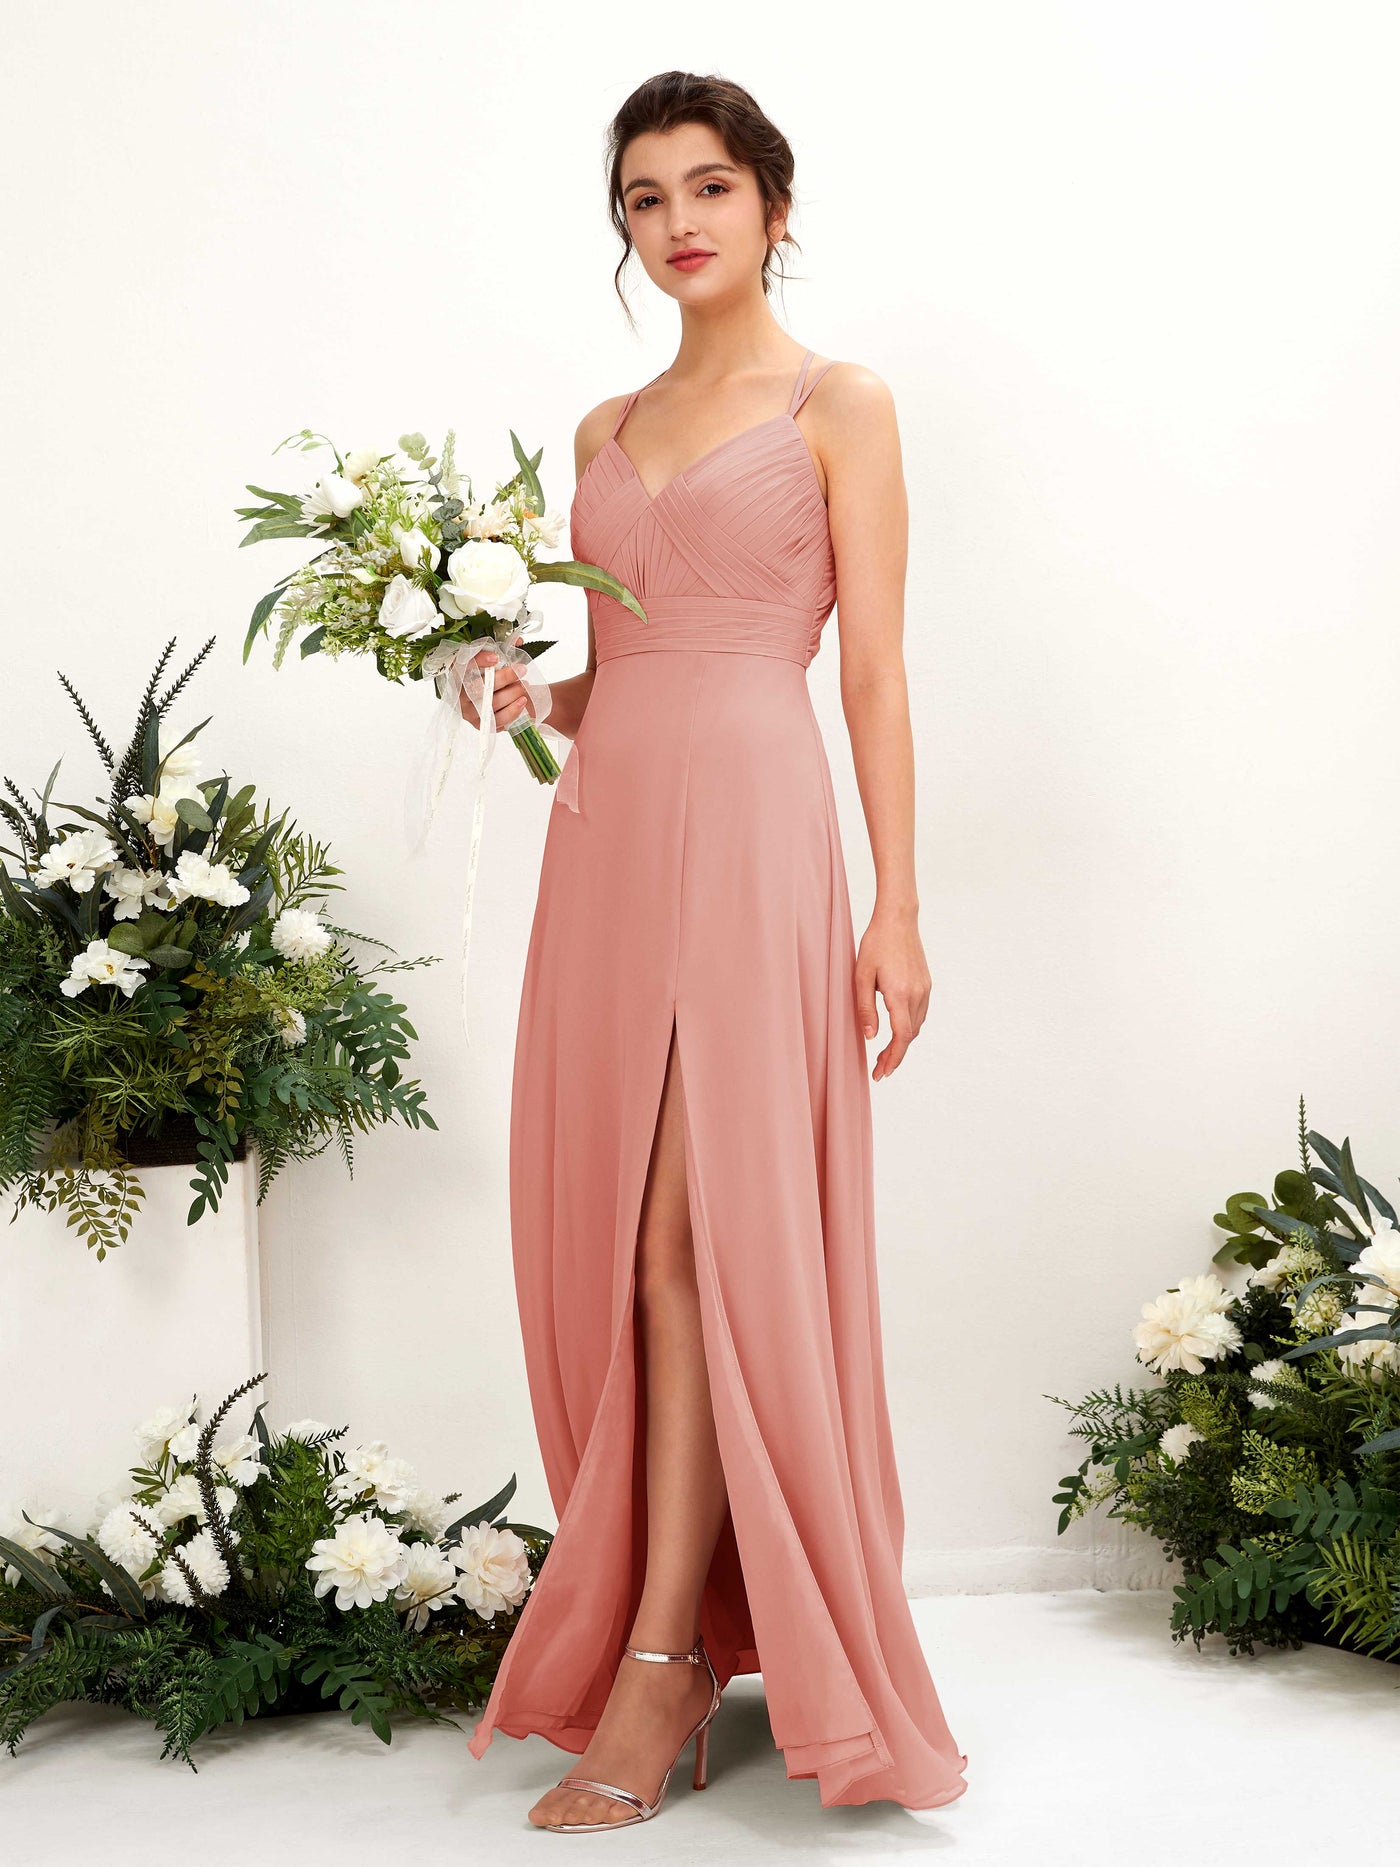 Champagne Rose Bridesmaid Dresses Bridesmaid Dress A-line Chiffon Spaghetti-straps Full Length Sleeveless Wedding Party Dress (81225406)#color_champagne-rose